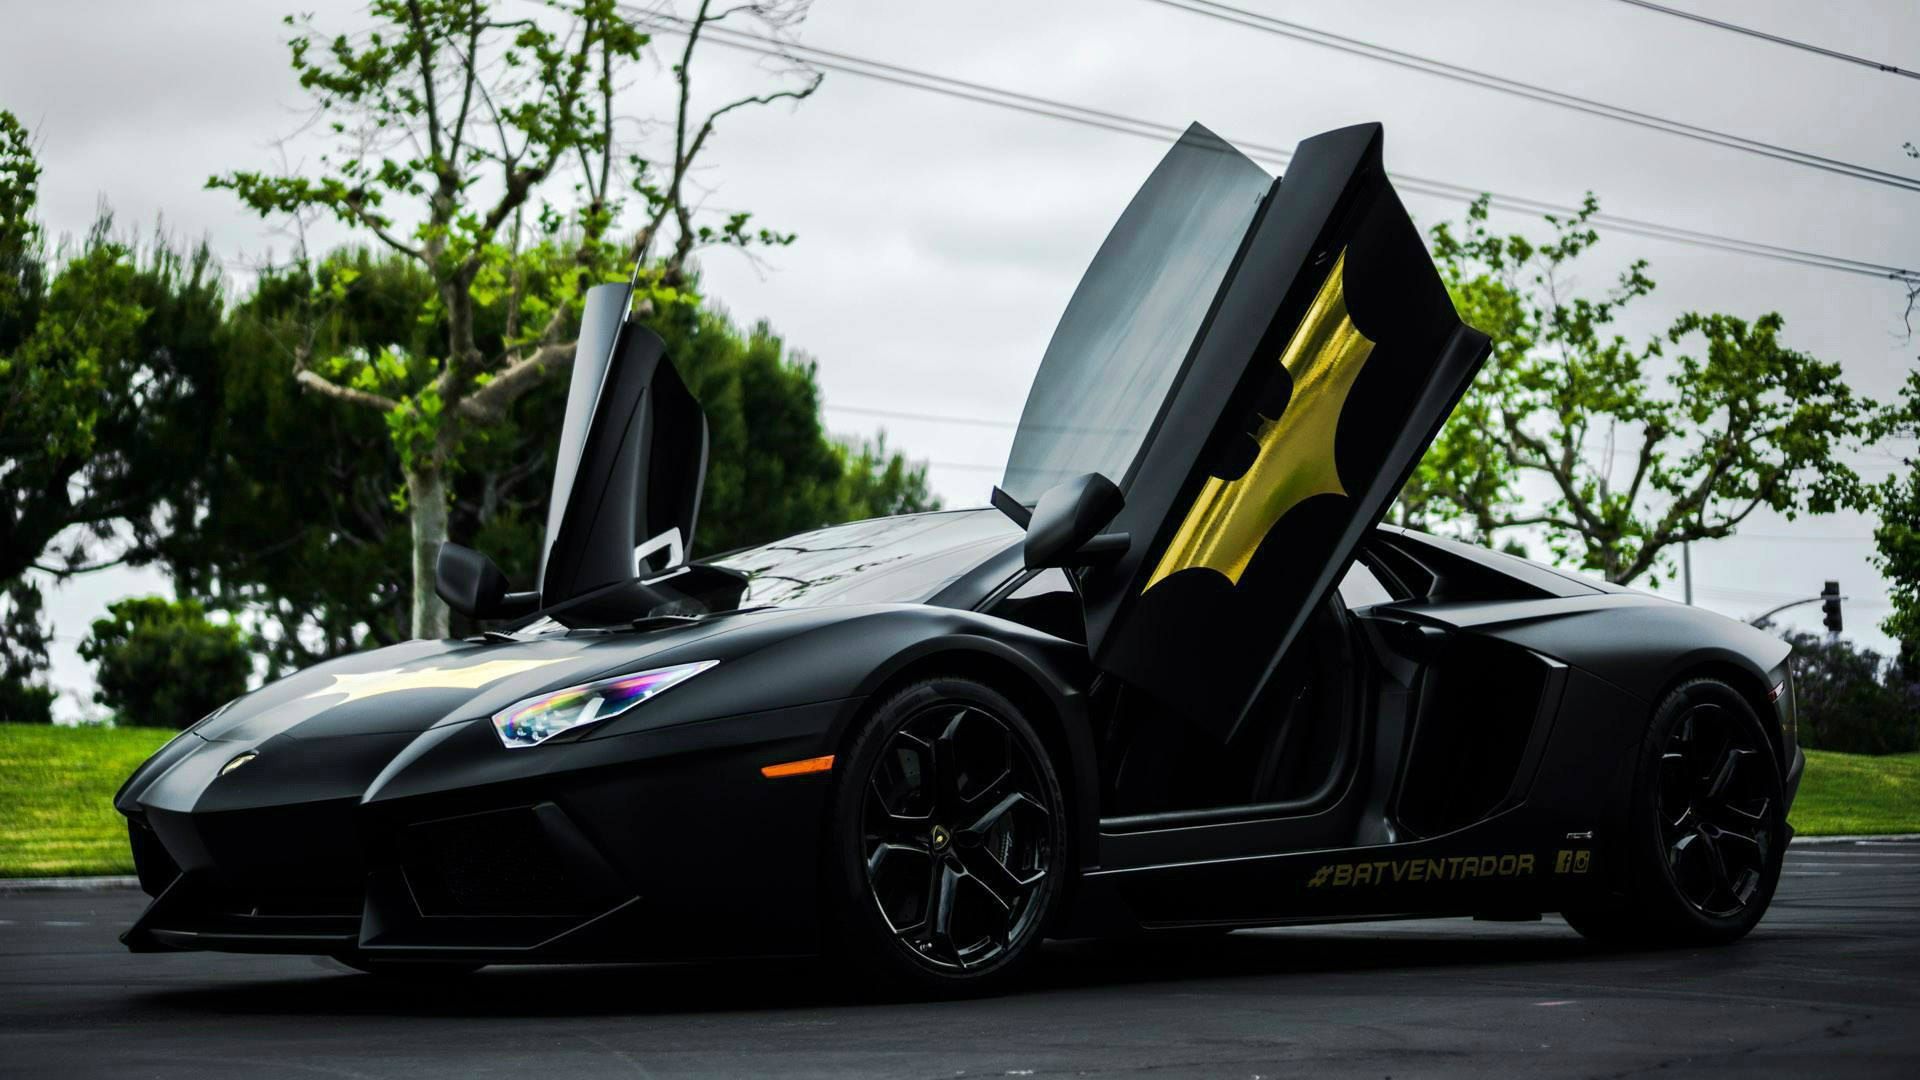 Lamborghini Aventador LP 700 4 With Open Doors Wallpaper And Image, Picture, Photo